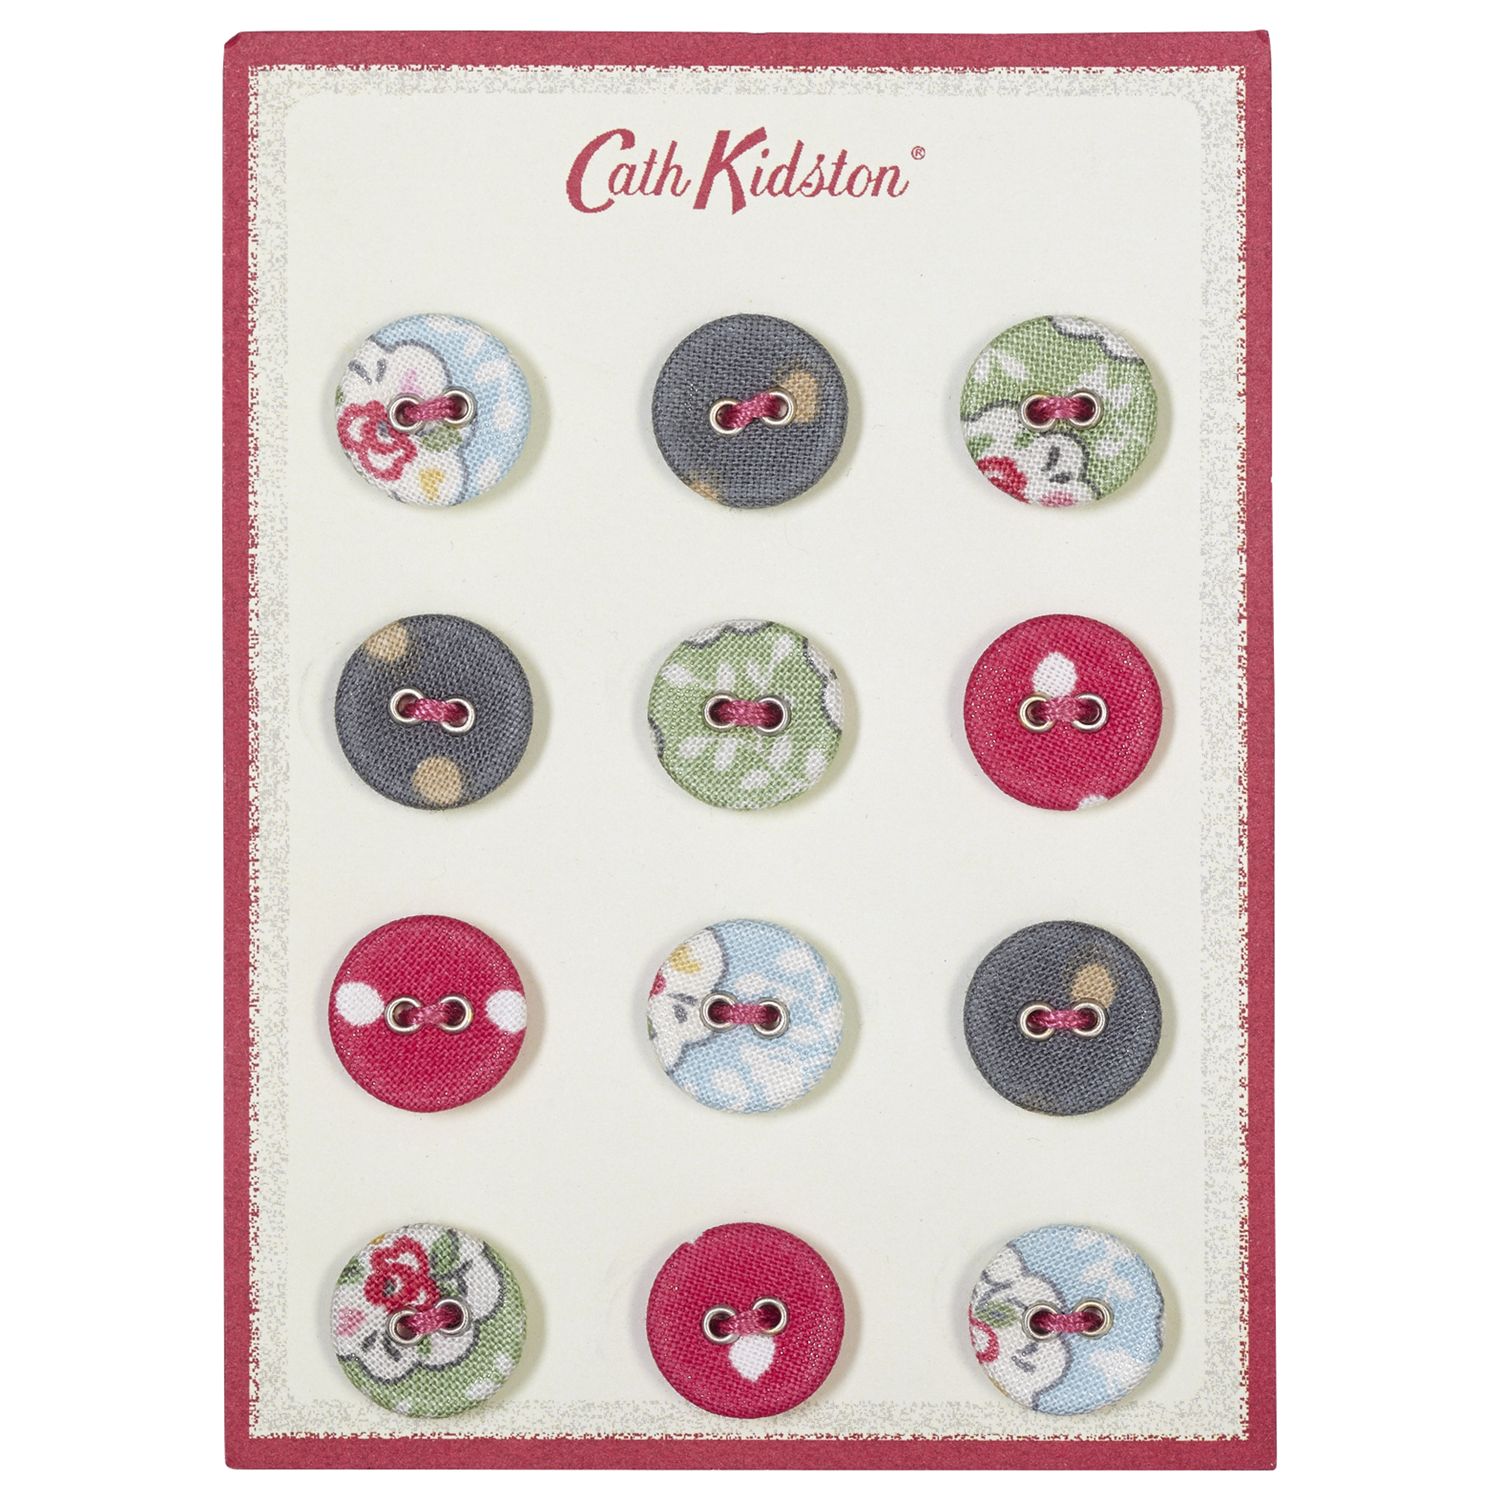 Cath Kidston Covered Buttons, Pack of 